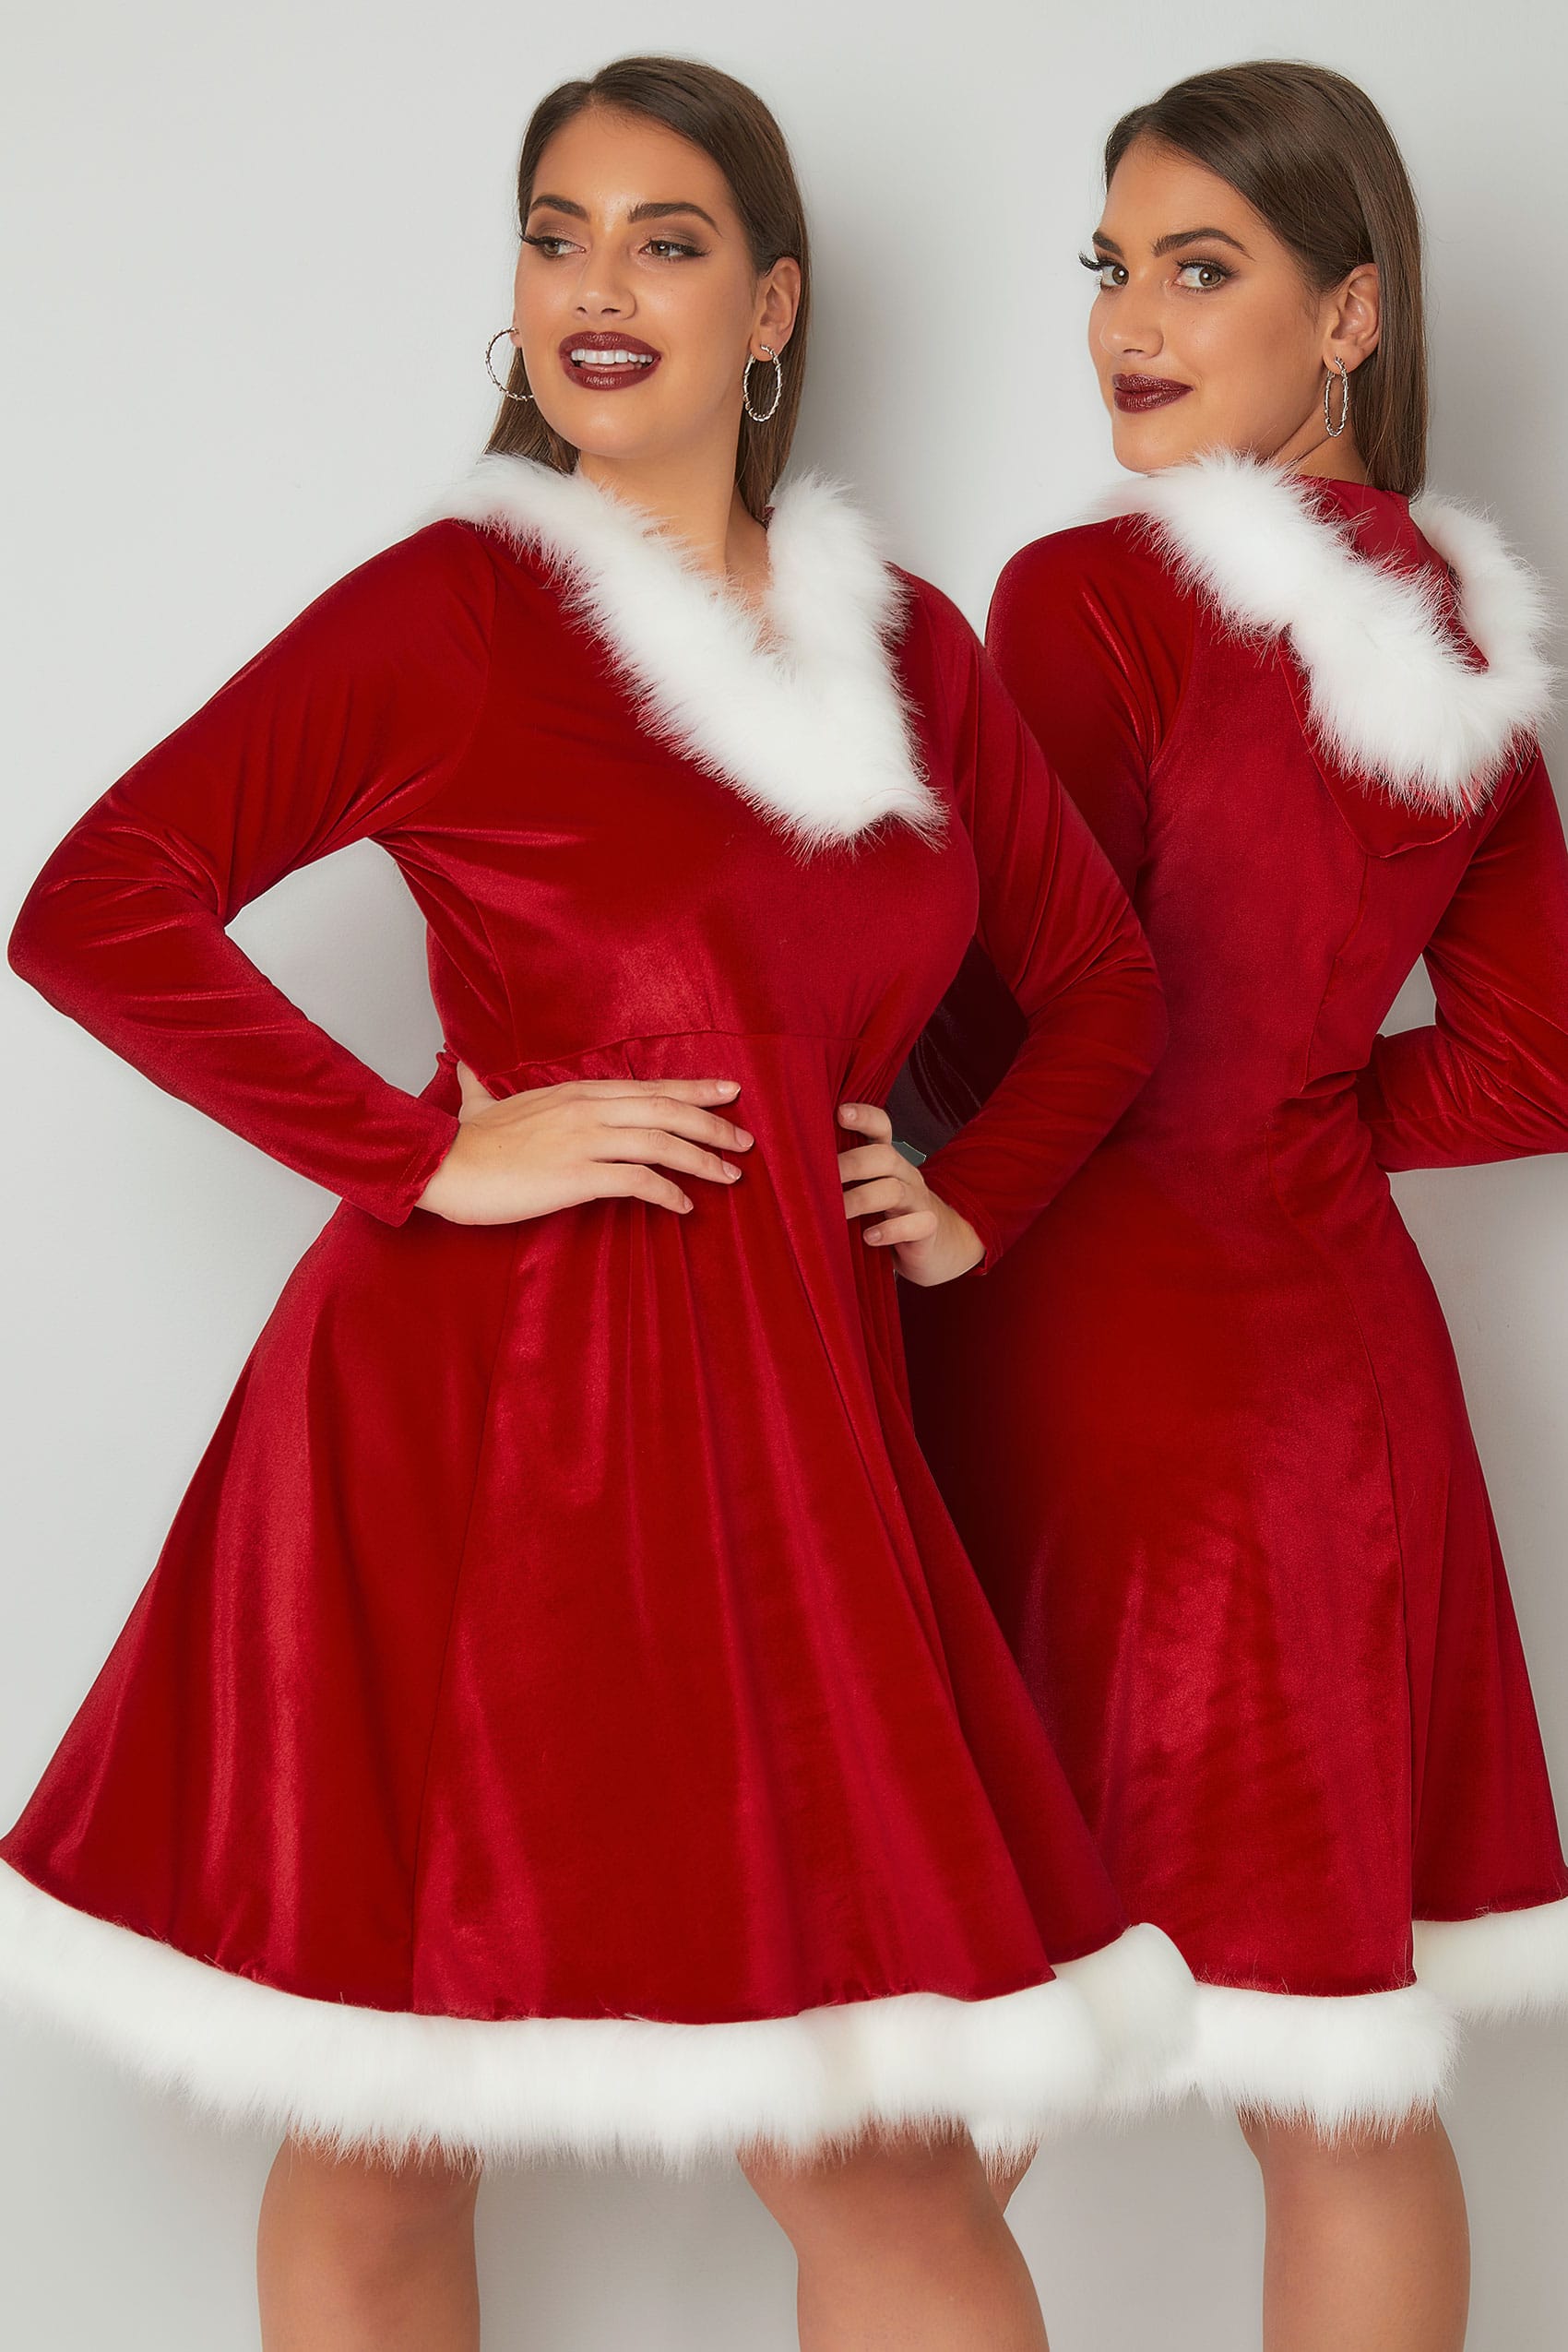 Red Santa Skater Dress With Faux Fur Trims, Plus size 16 to 32